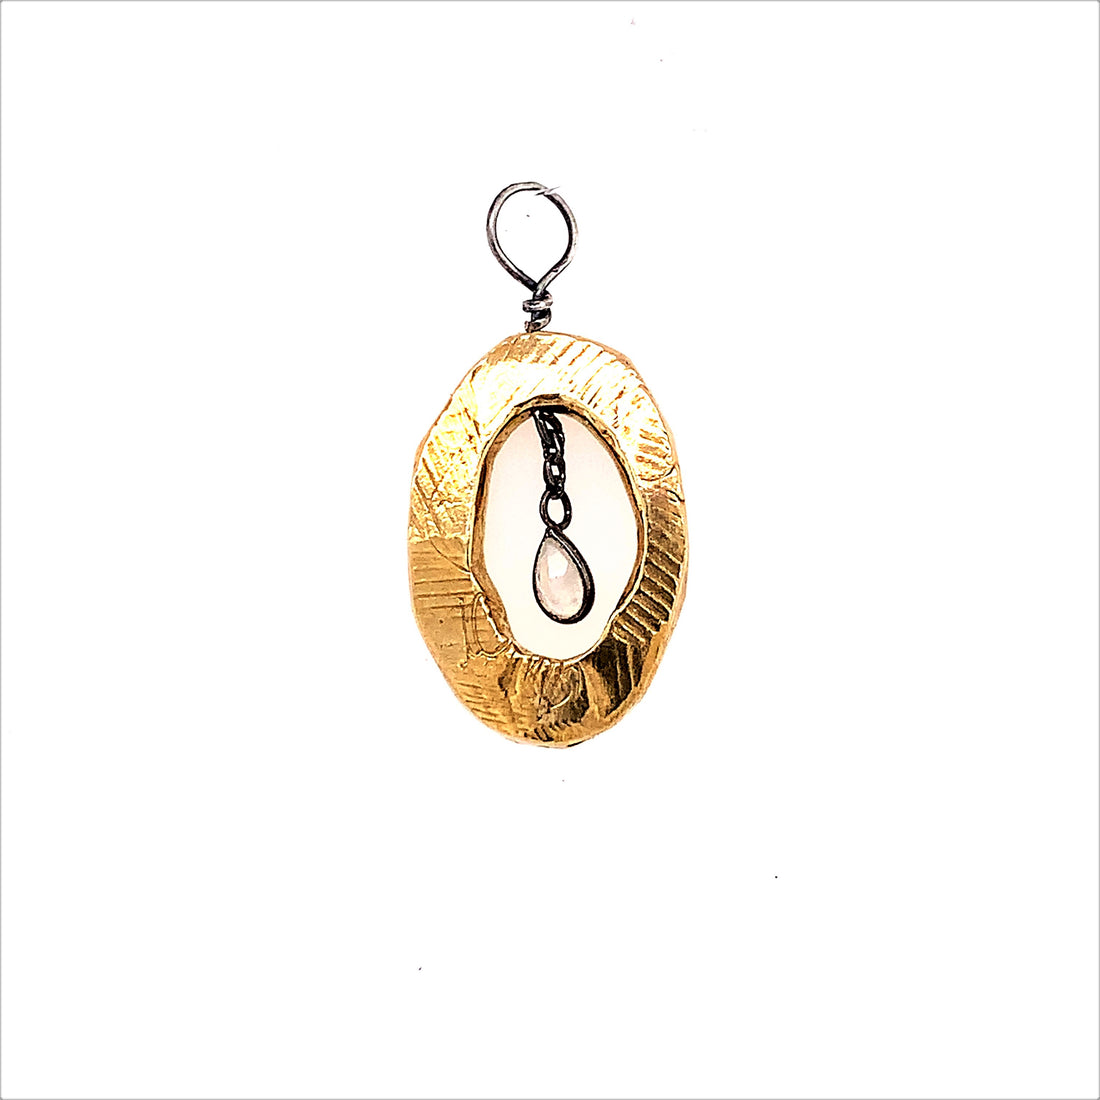 With all the unrest we feel, peace is ever important in our lives. The Peace Talisman was designed to help facilitate a calm state of mind and soothe instability and stress during these conflicted times. A suspended moonstone was incorporated into the design of this Talisman because they are the stone for "new beginnings and inner strength".